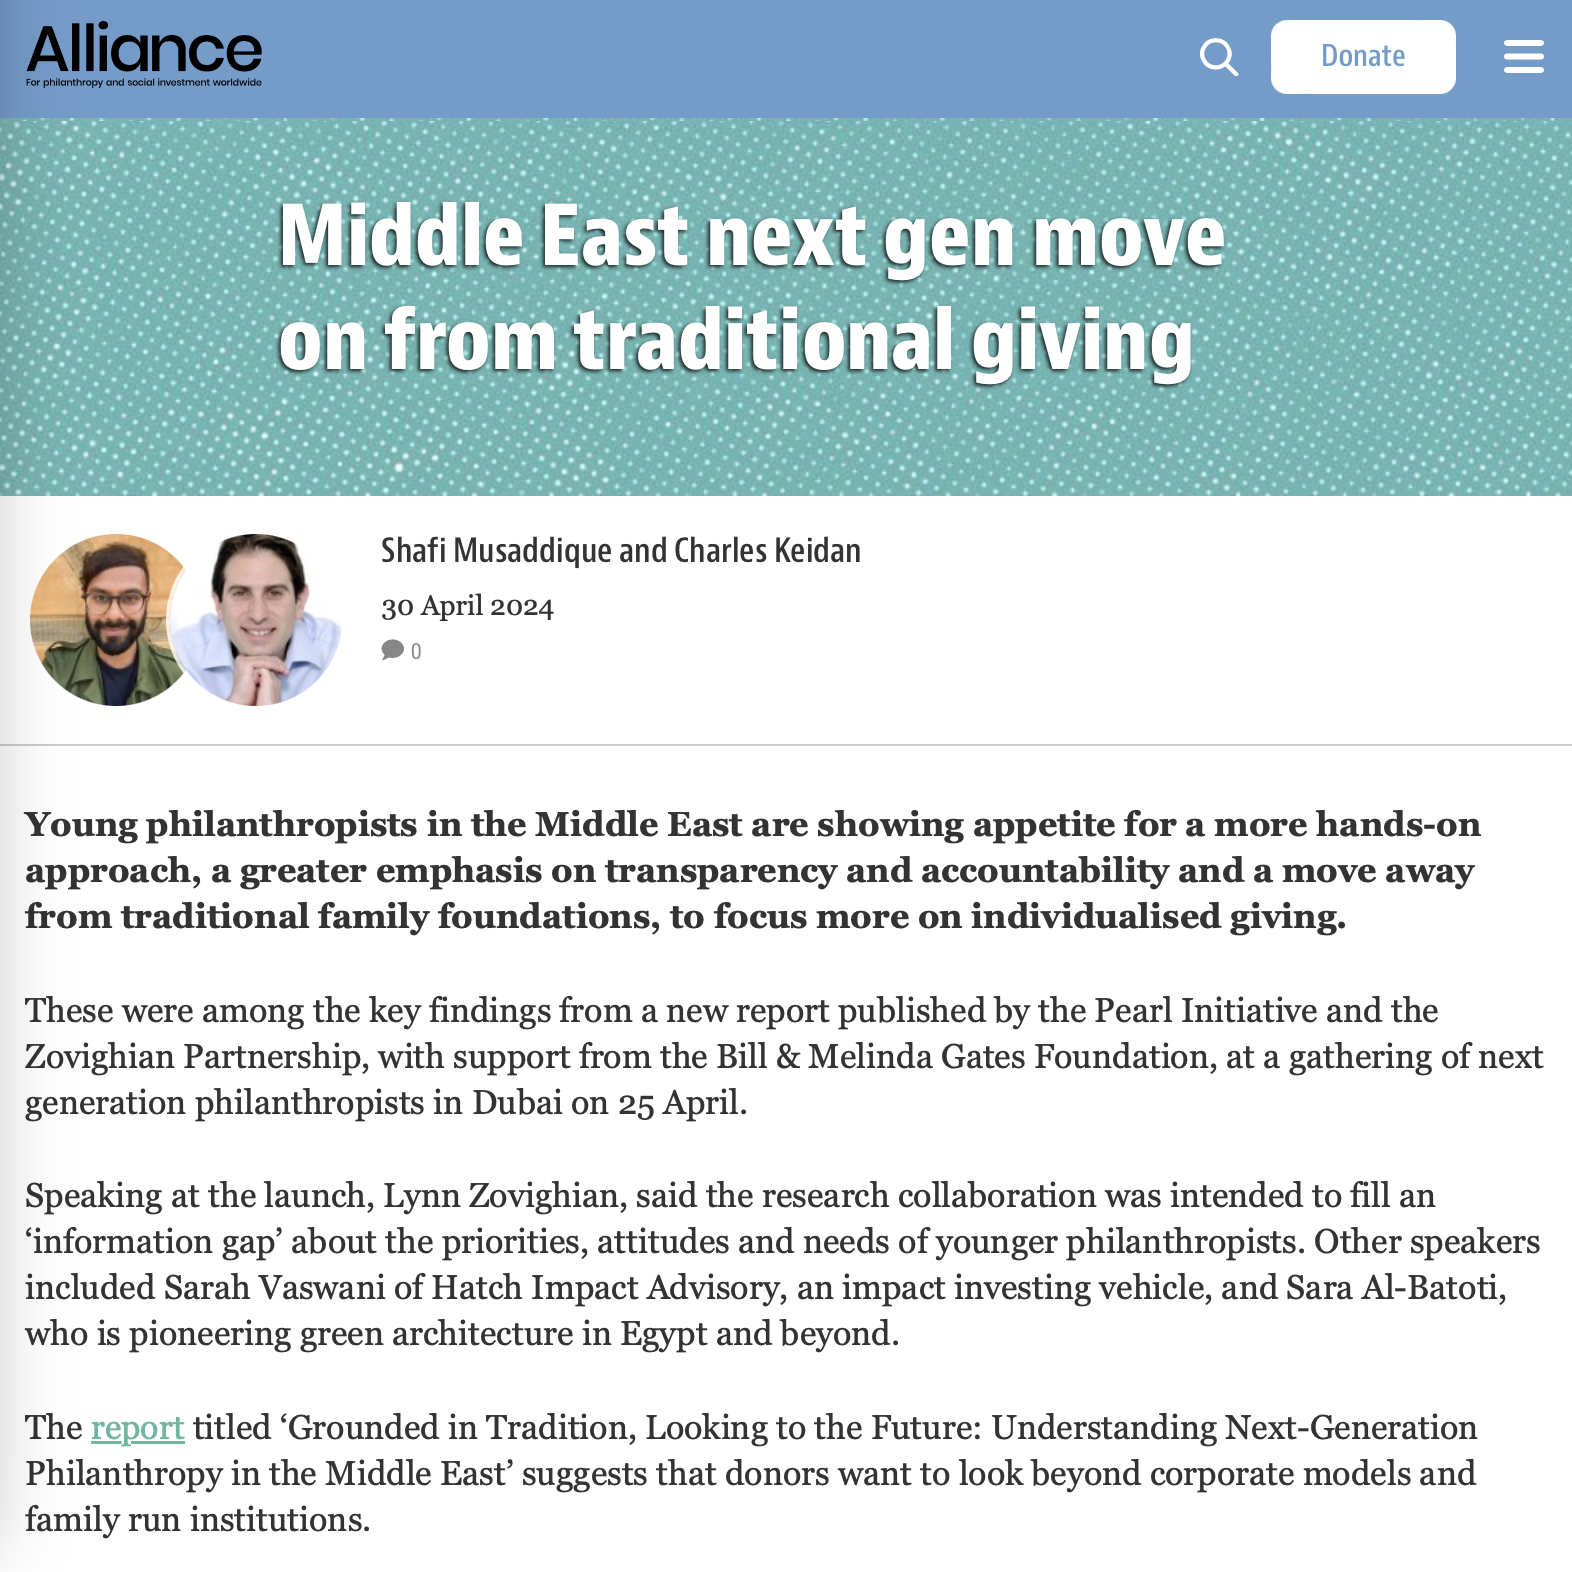 The middle east next gen move on from traditional giving